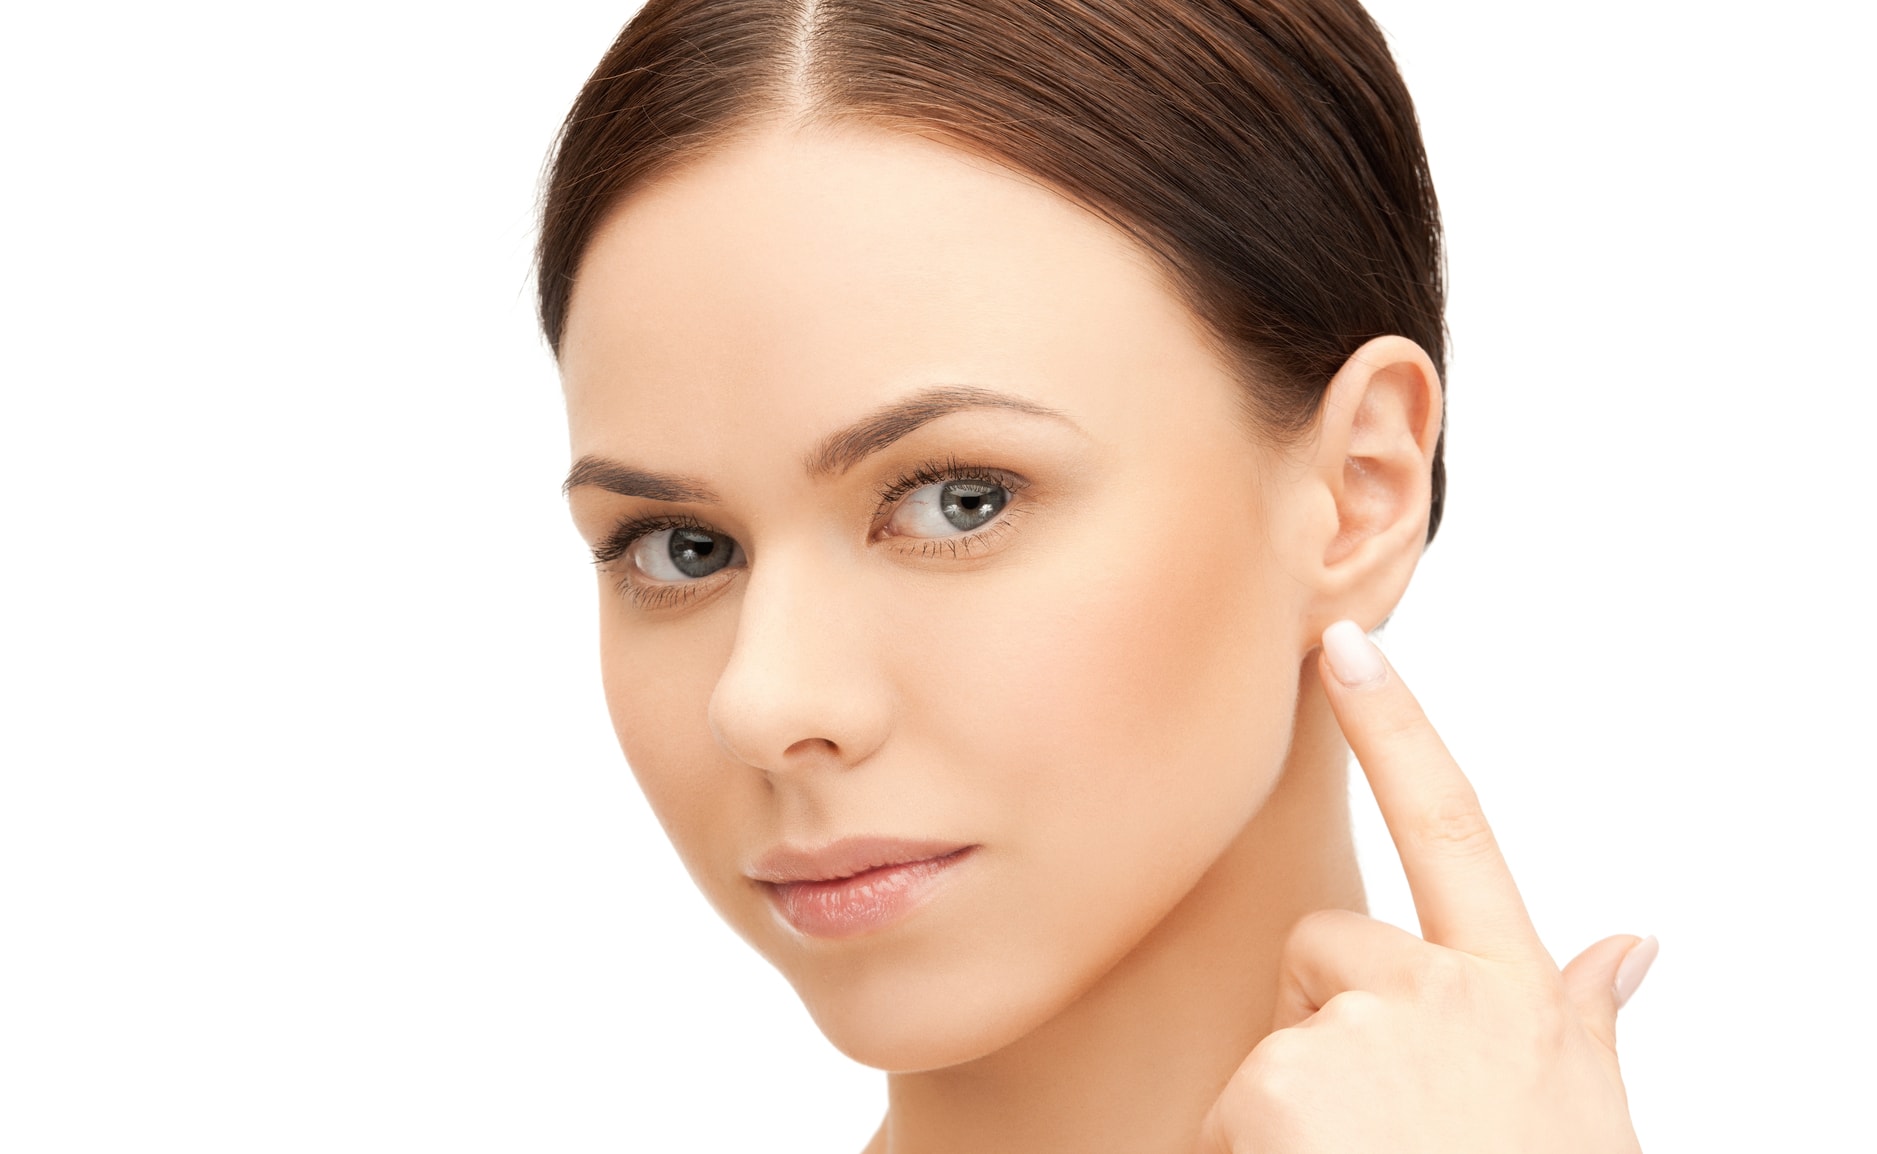 Otoplasty will reshape and reduce the size of your ears 